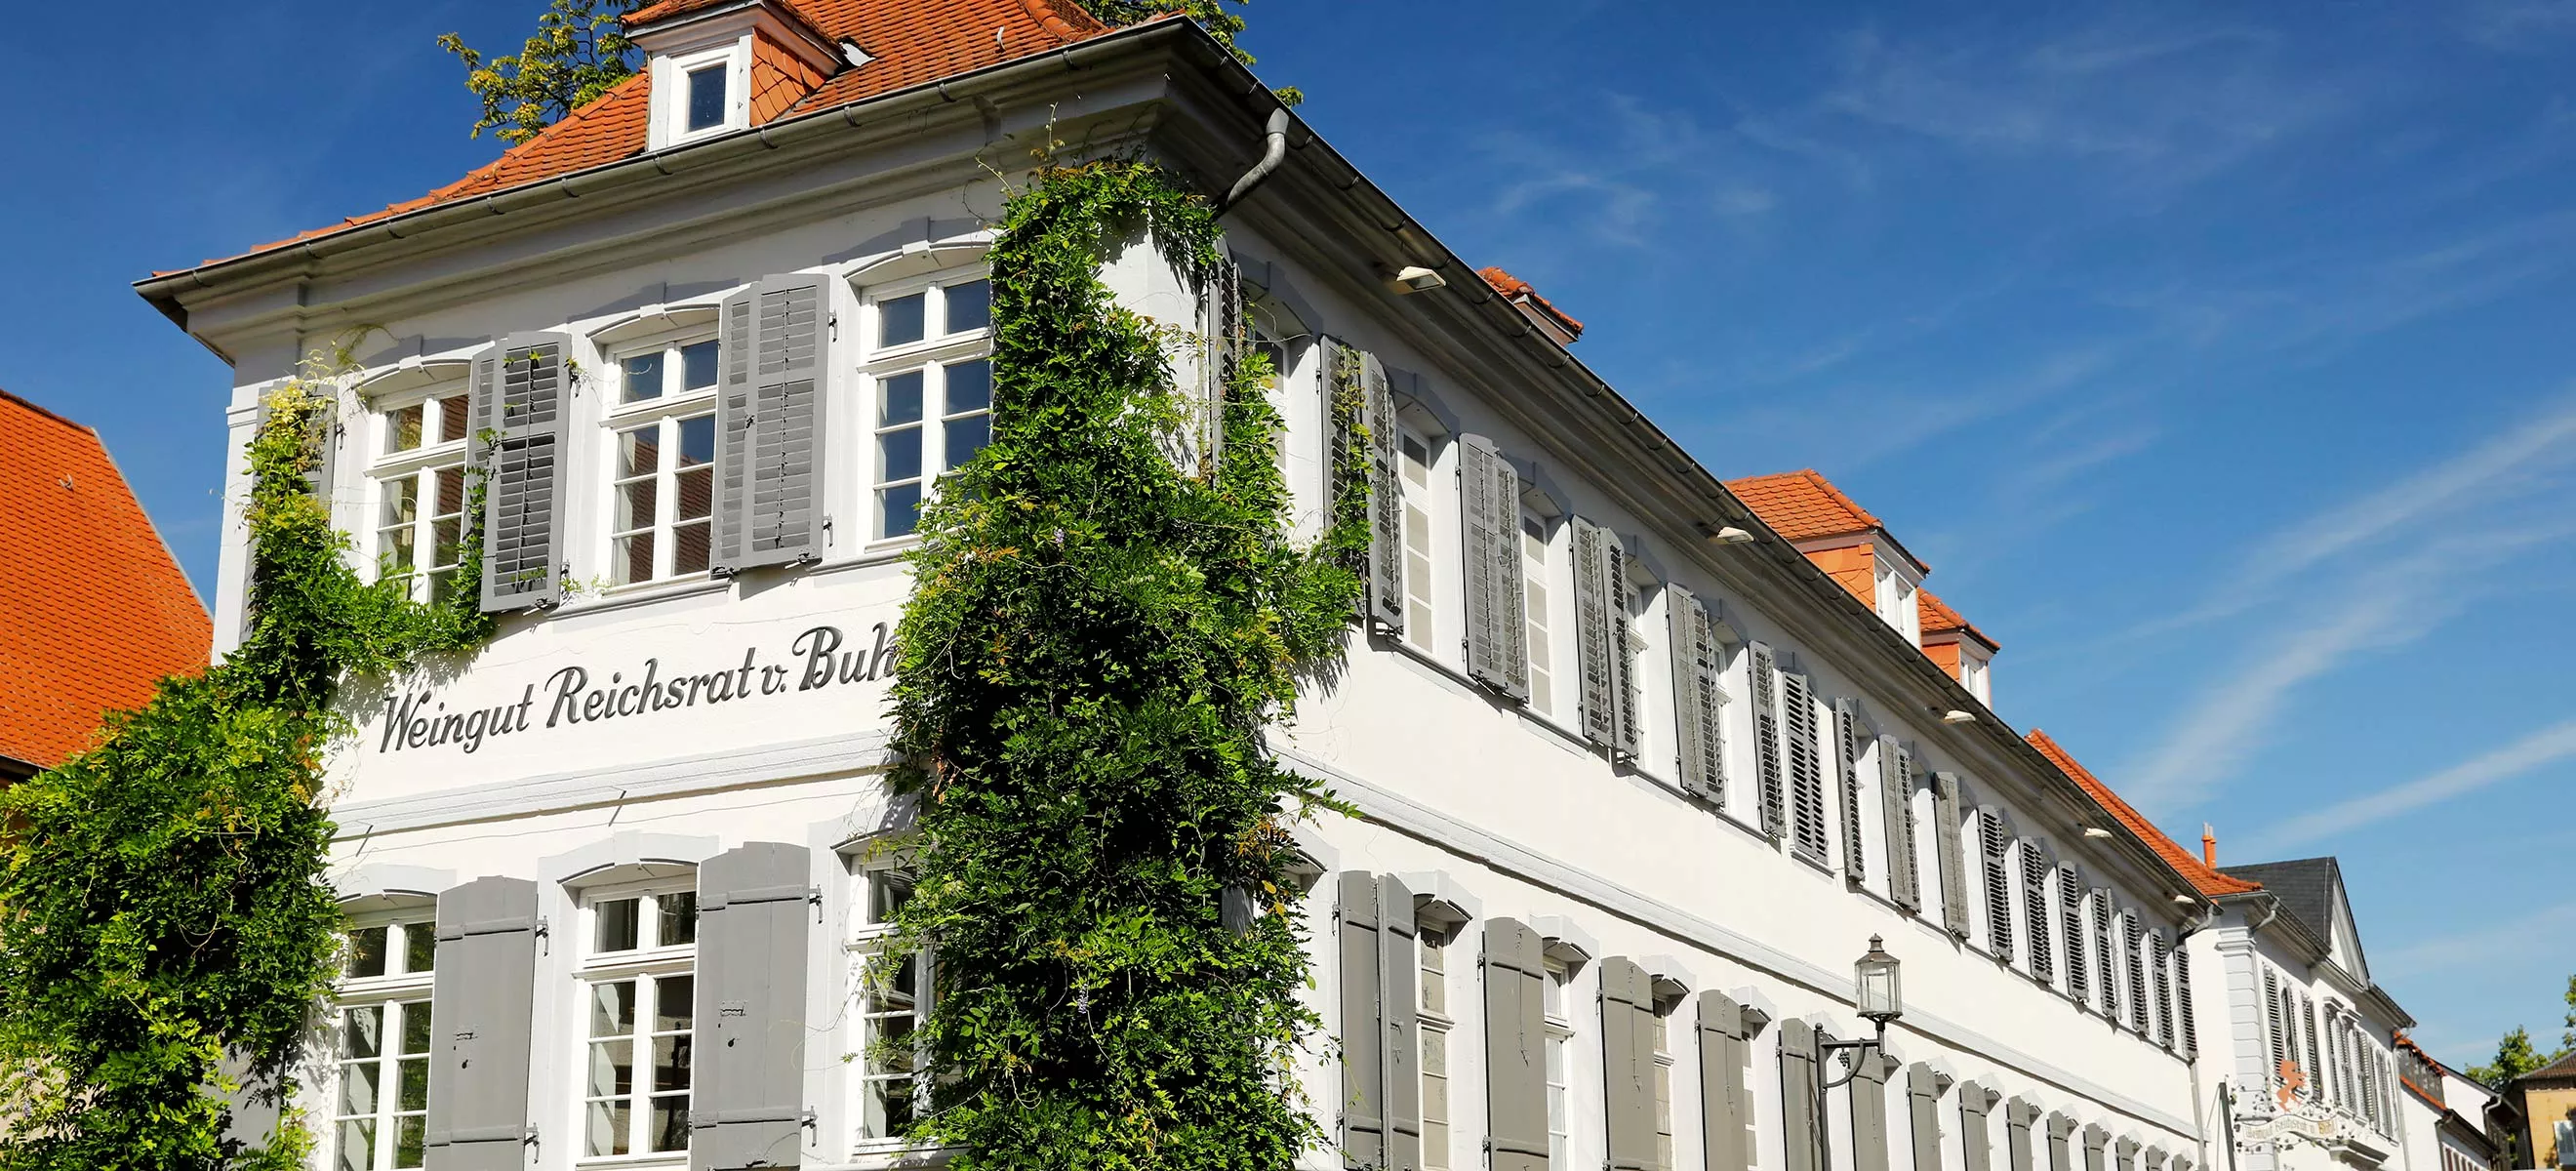 Reichsrat von Buhl GmbH Winery in Germany, Europe | Wineries - Rated 0.8